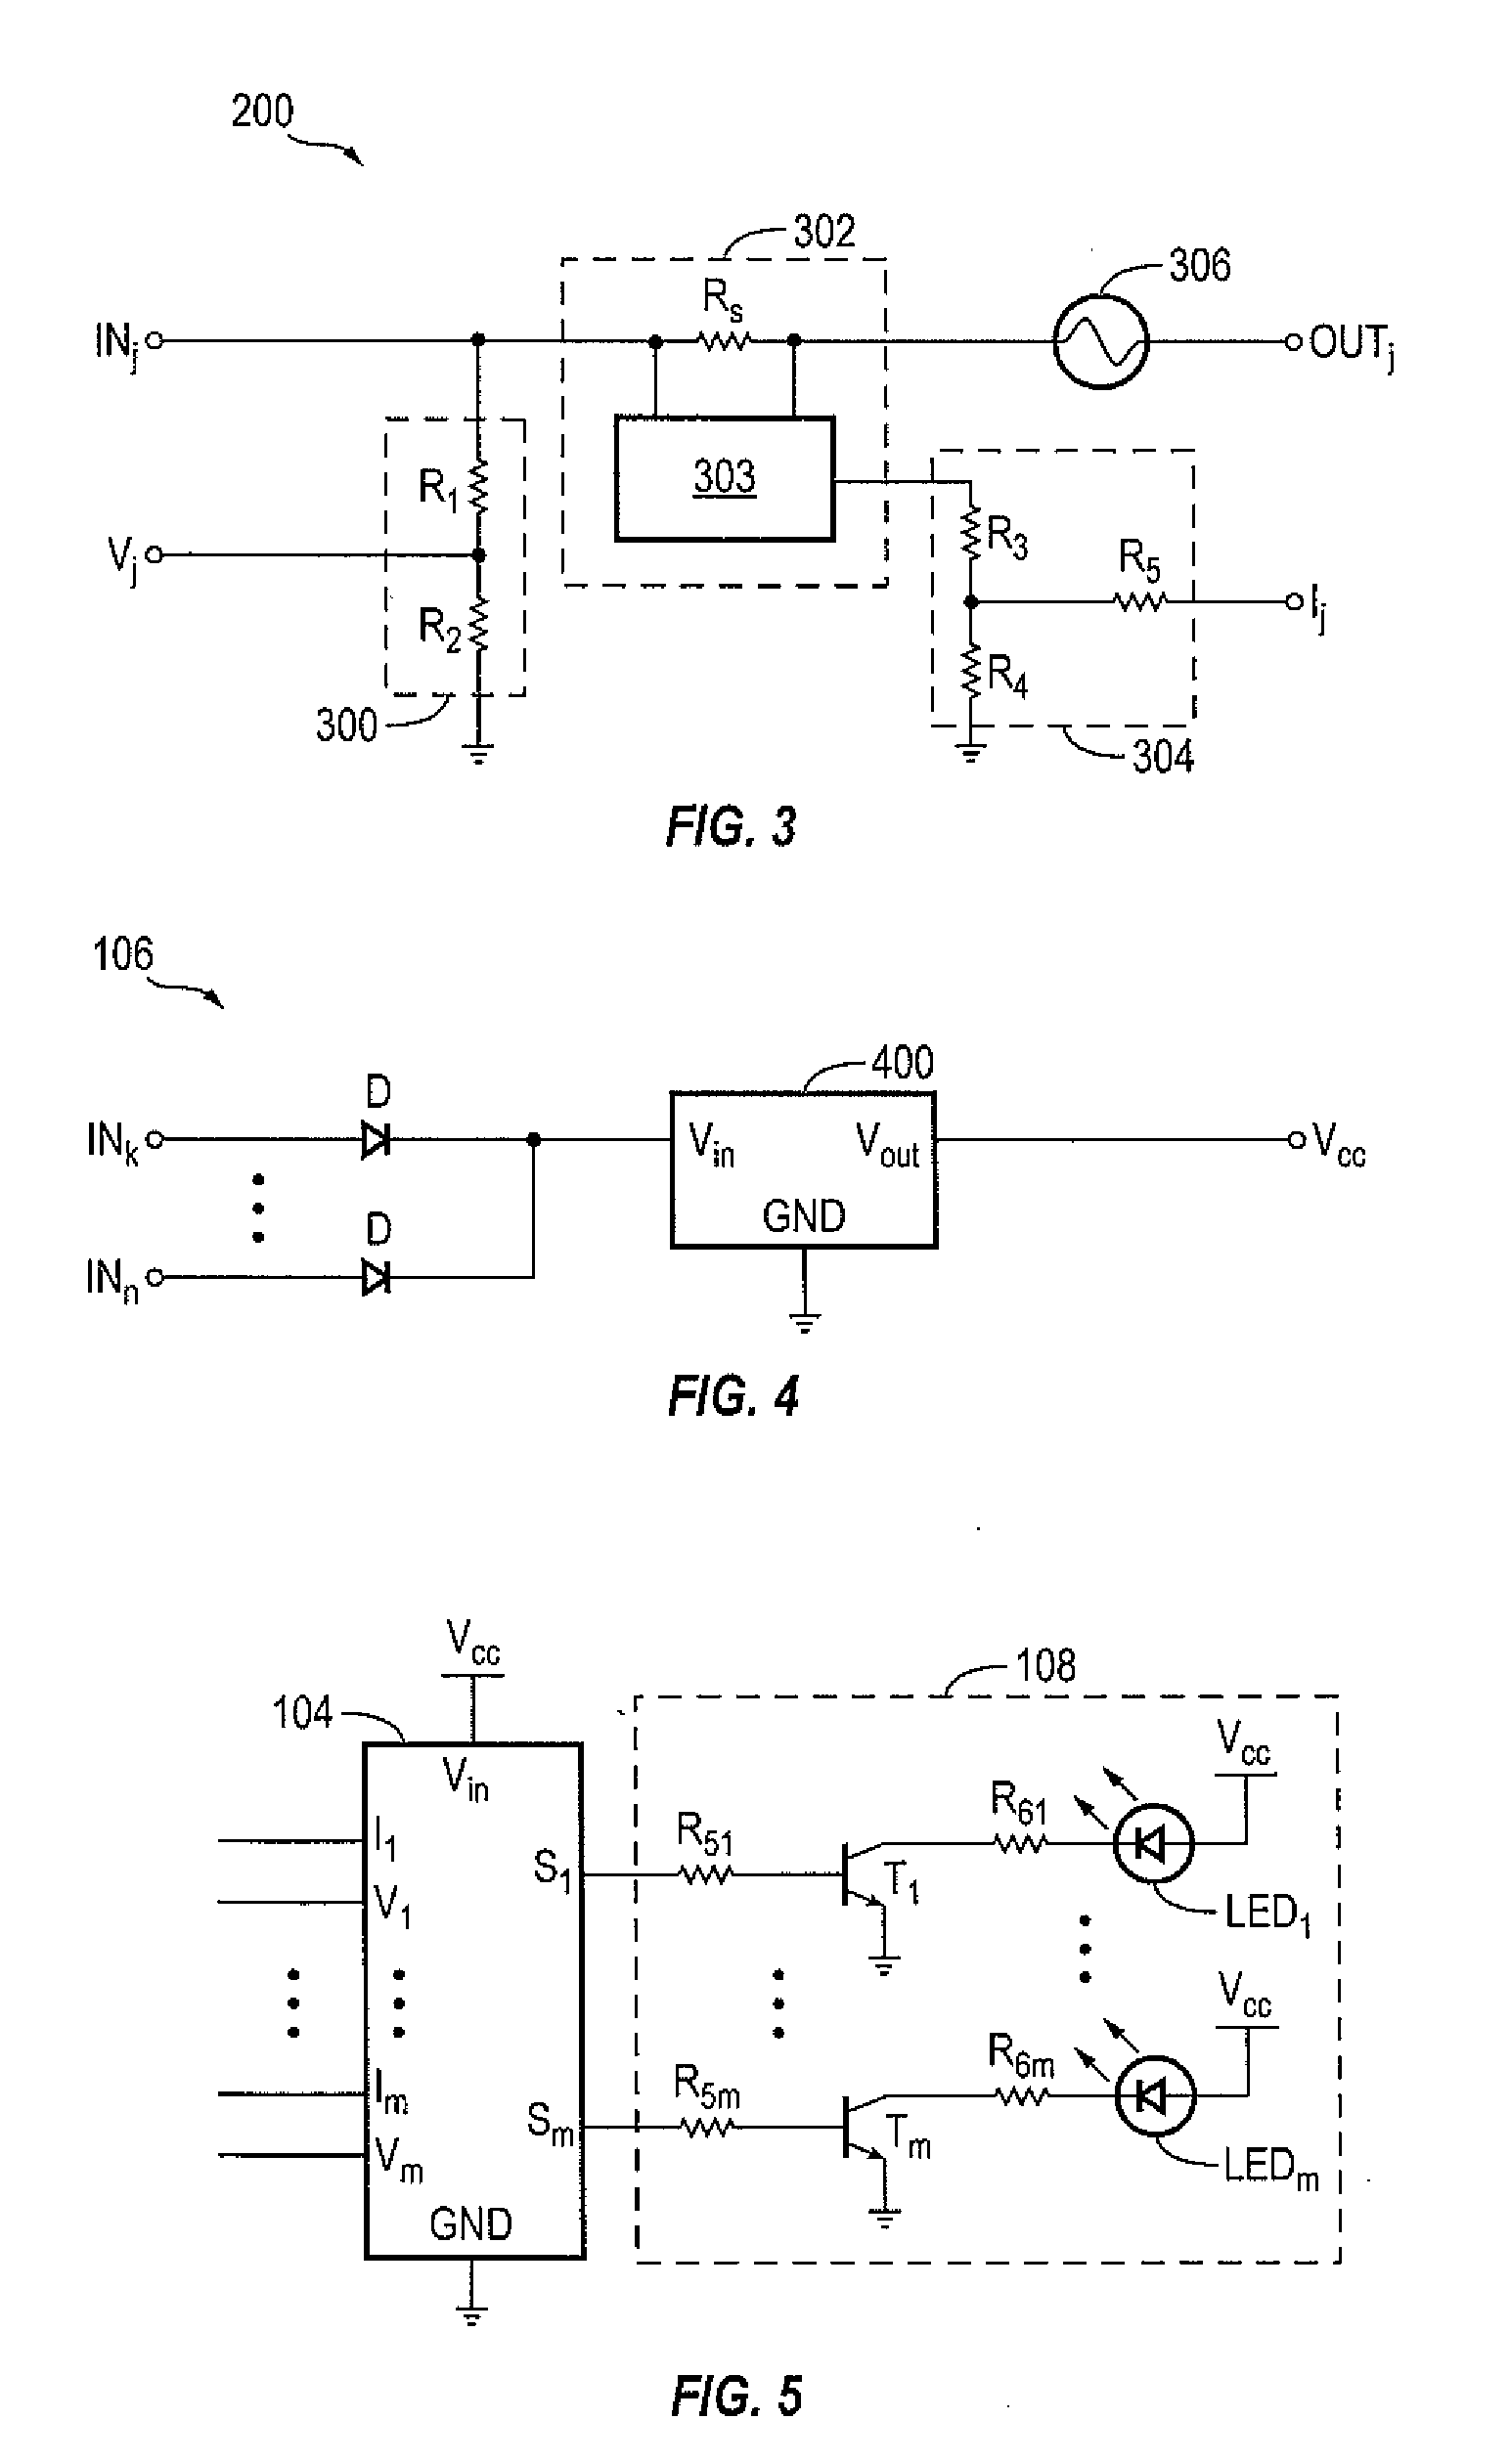 System for detecting the integrity of a lighting circuit